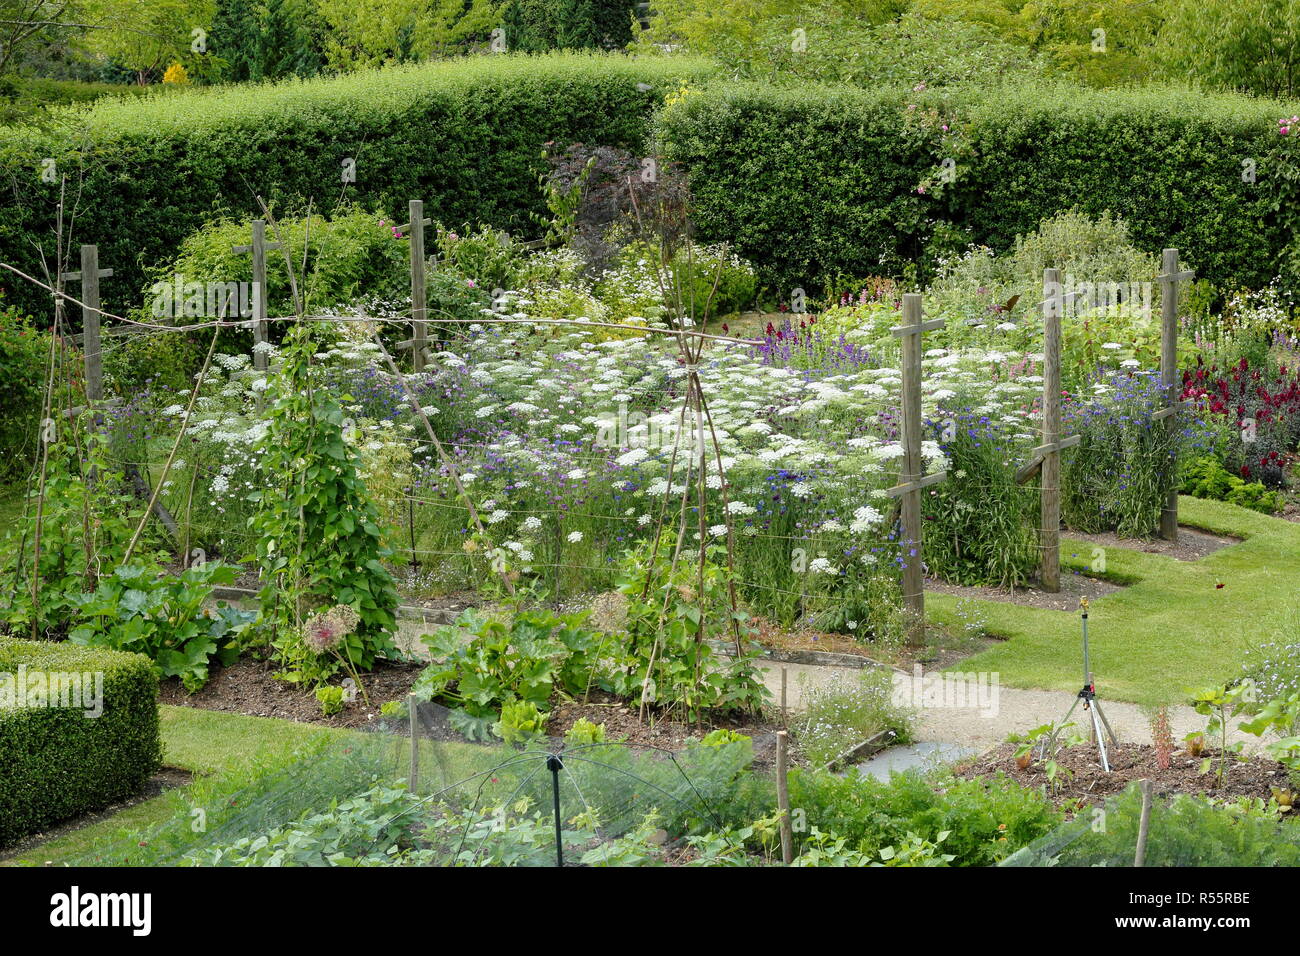 Some of the gardens at Easton Walled Gardens, Easton near Grantham,. Lincolnshire, UK. Vegetable beds and cutting garden pictured. Stock Photo